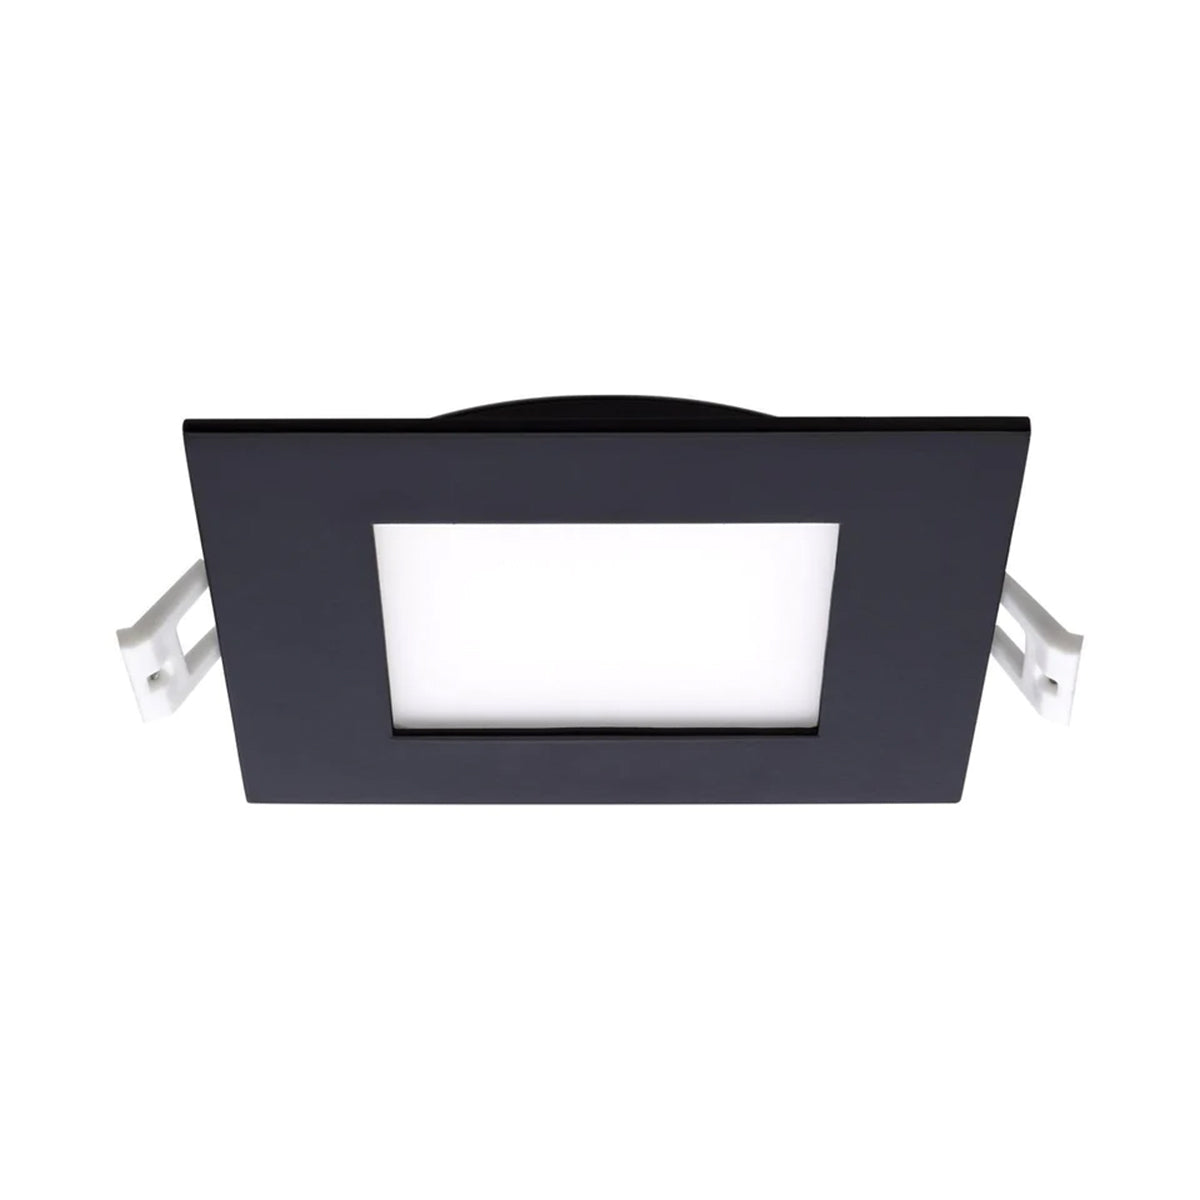 SlimFit Canless LED Recessed Light, 4 inch, Edge-Lit, Square, 10 Watt, 650 Lumens, Selectable CCT, 2700K to 5000K, Ultra Thin